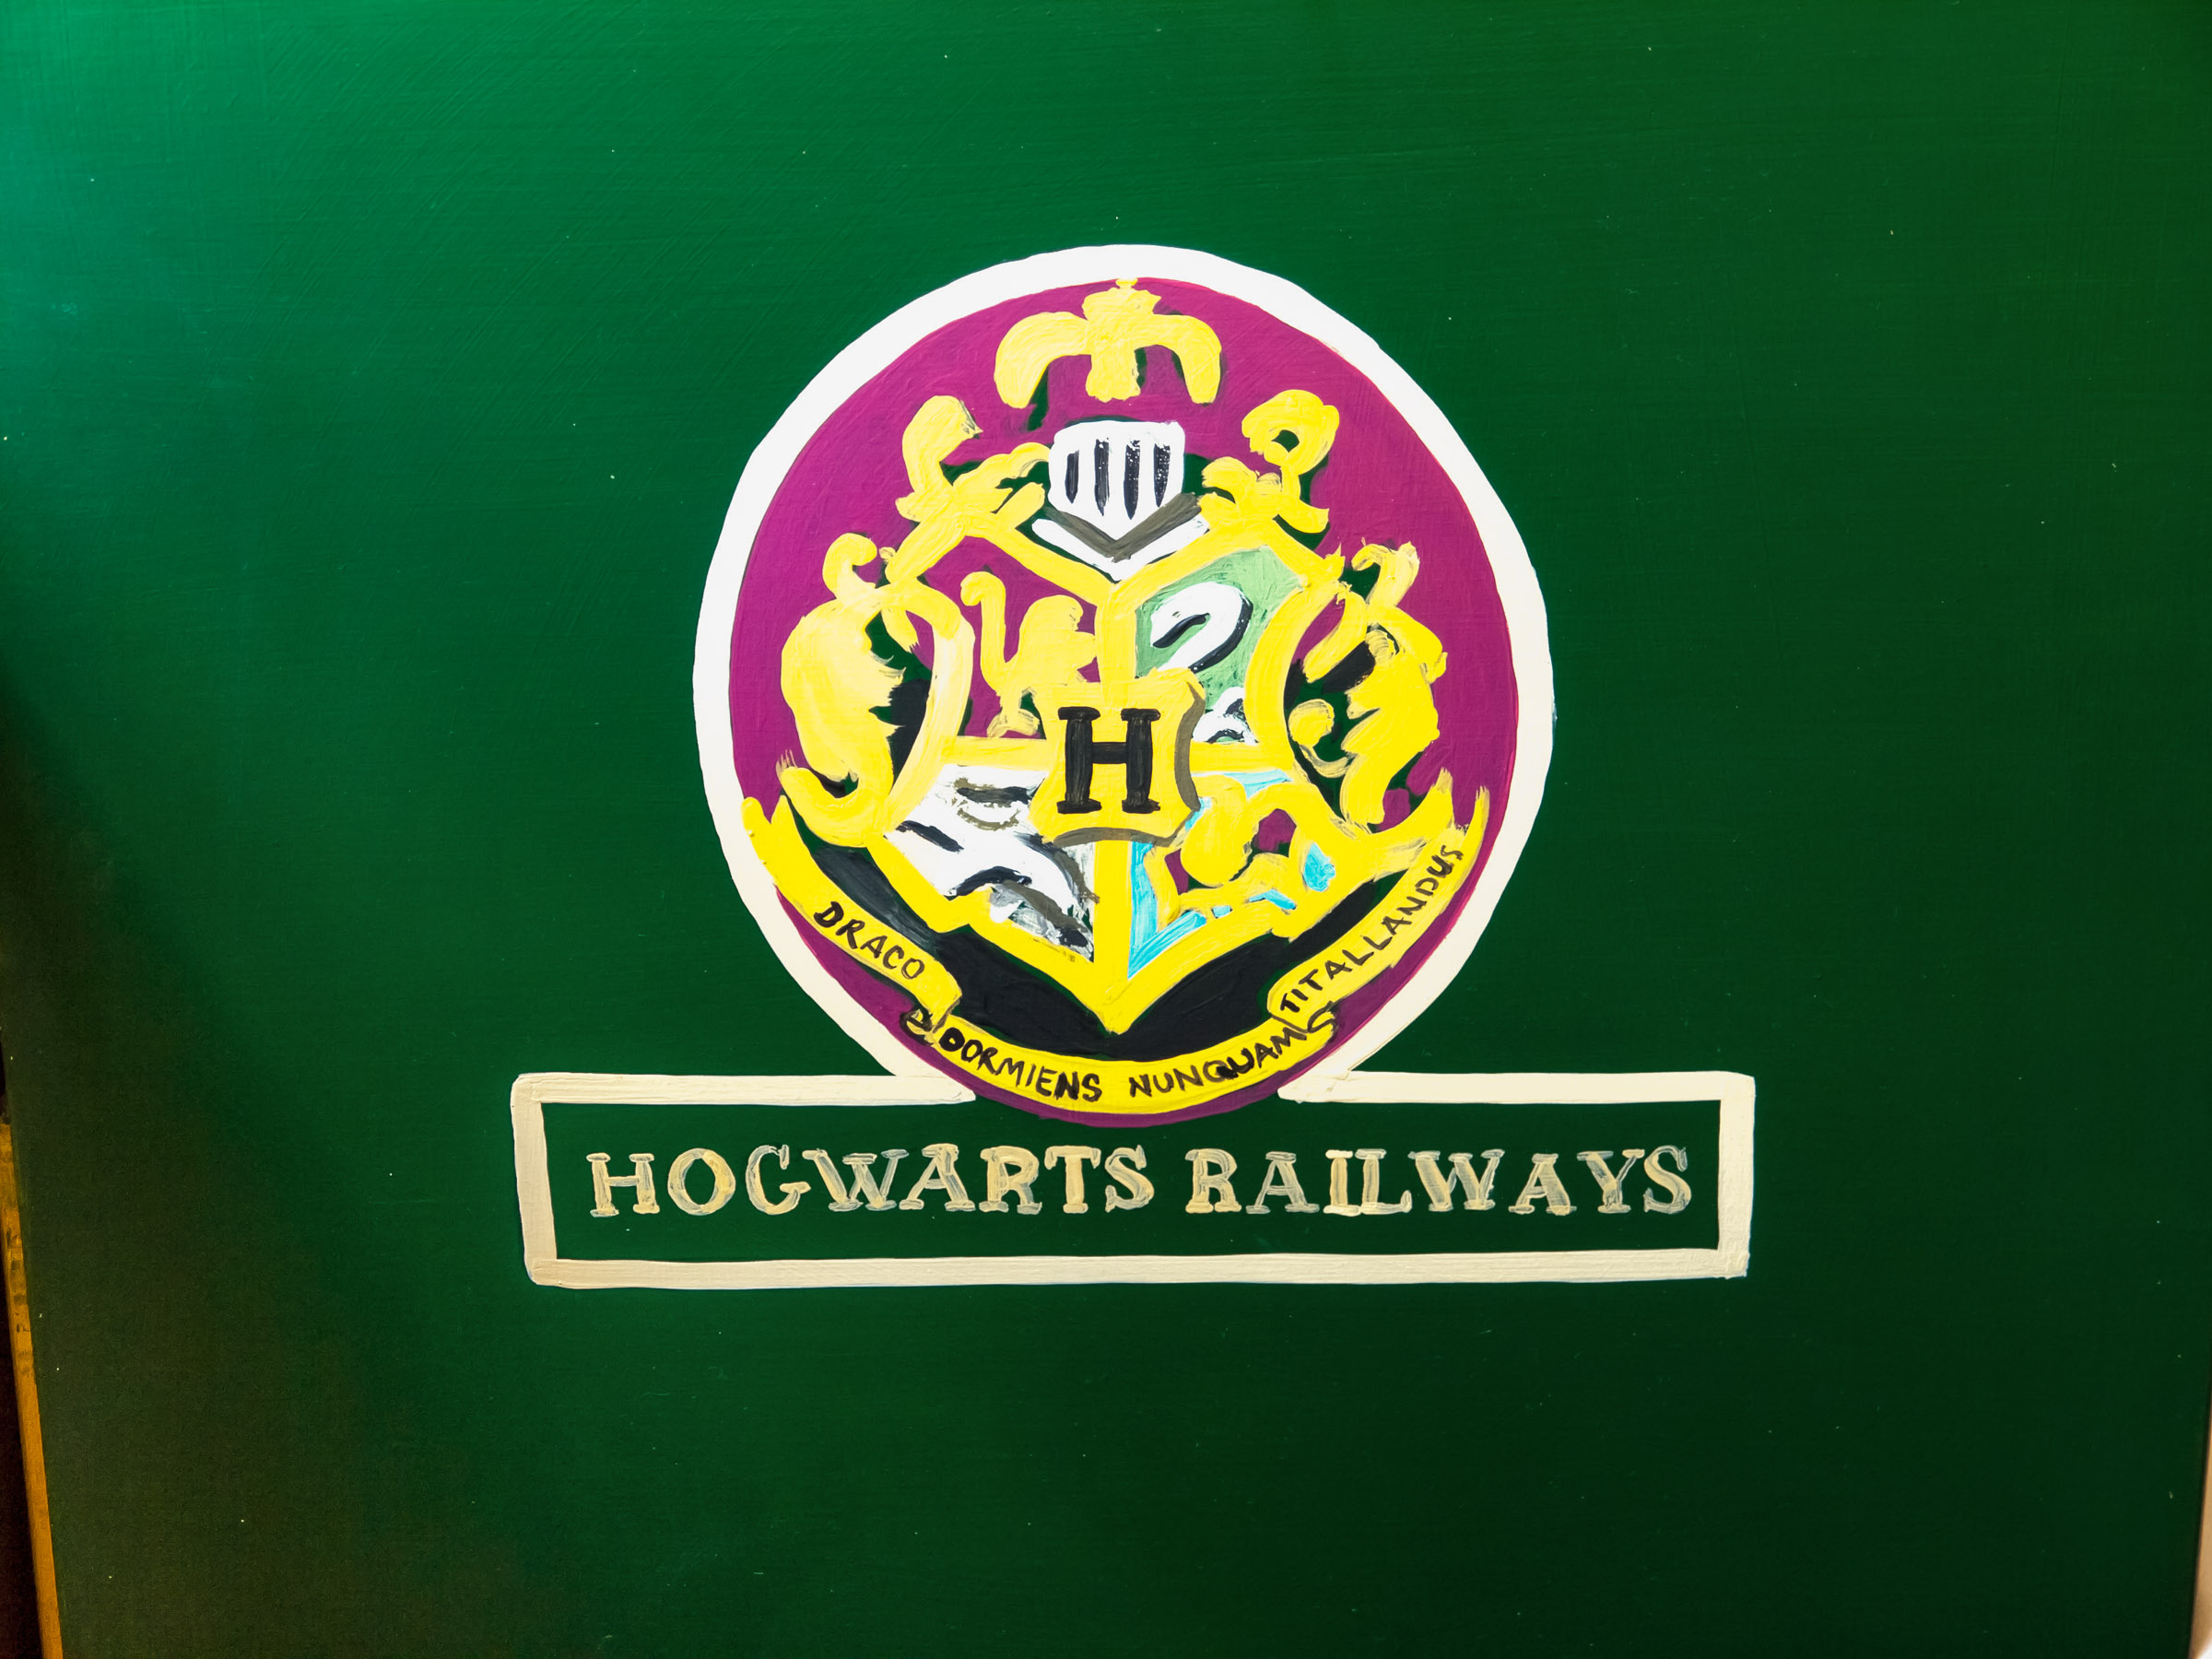 A quick painting of the Hogwarts Railway logo